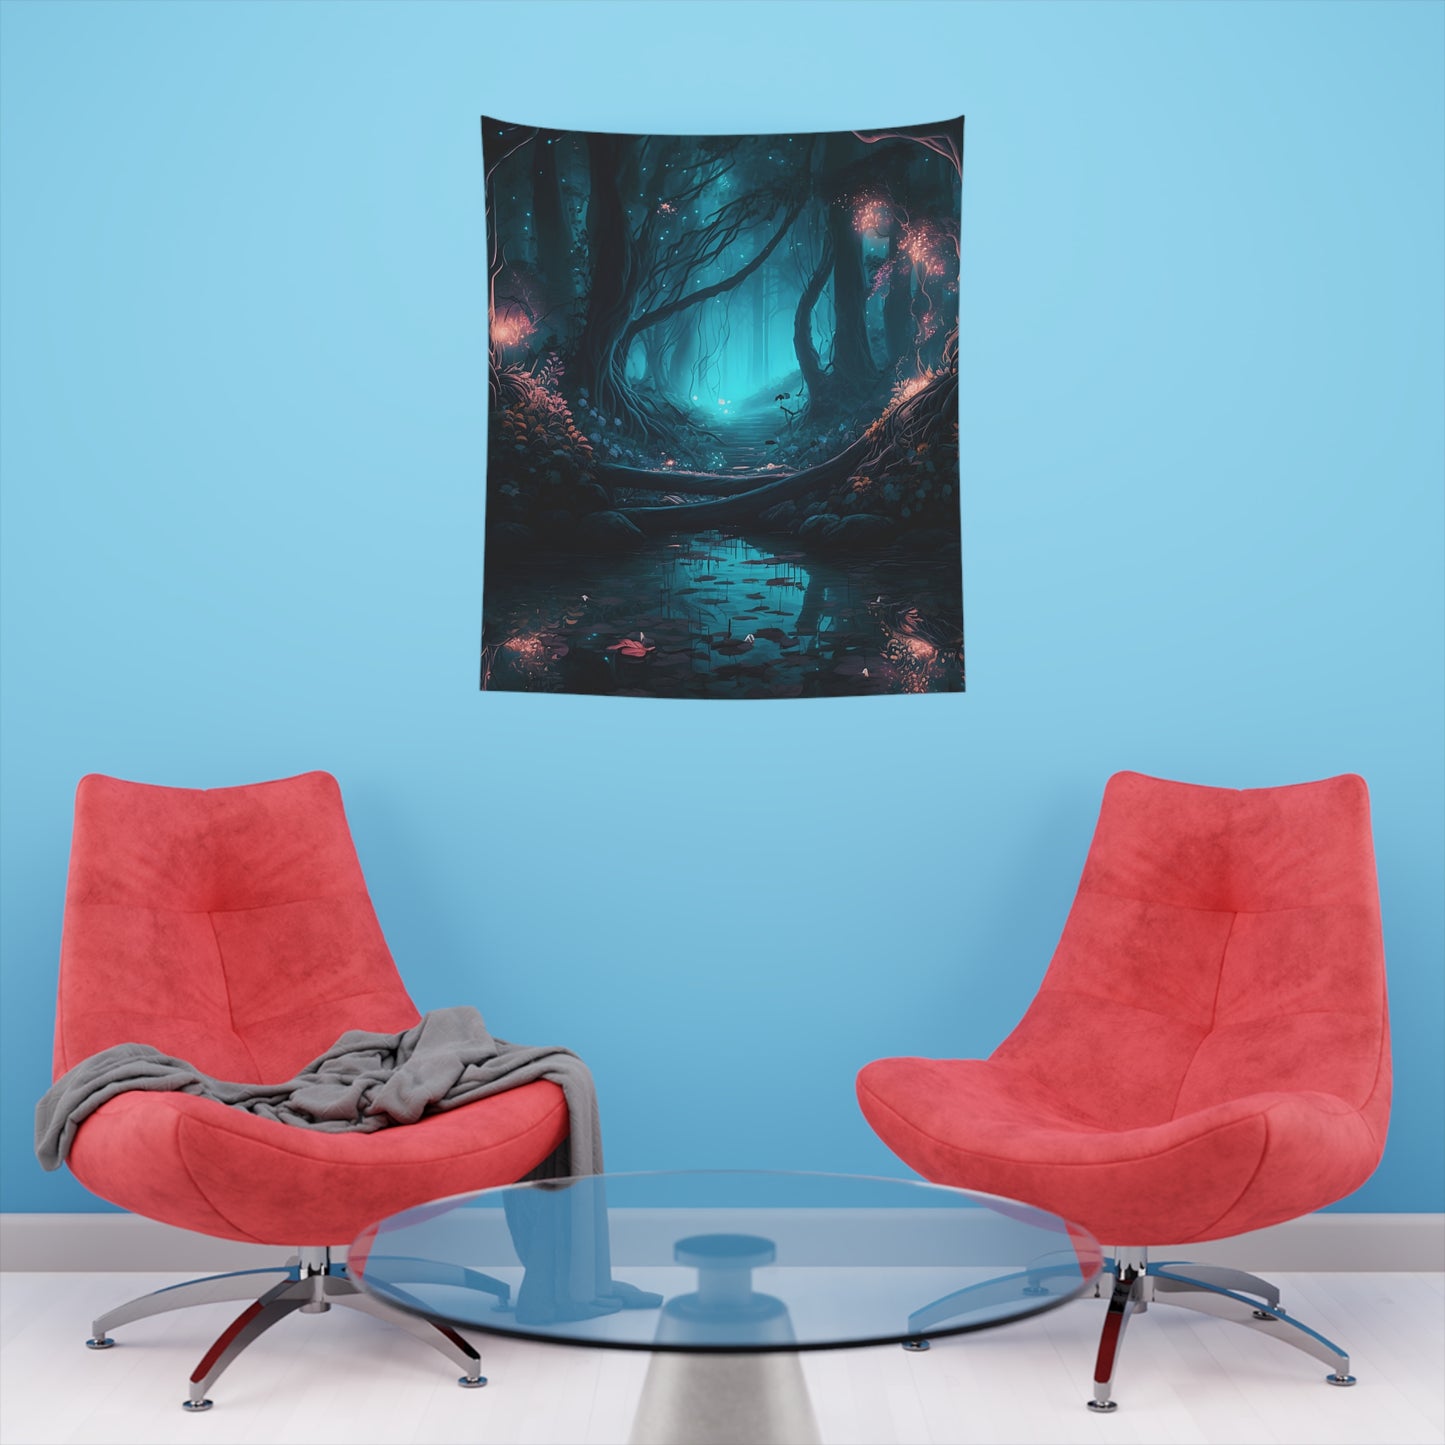 Majestic fantasy forest - Printed Wall Tapestry